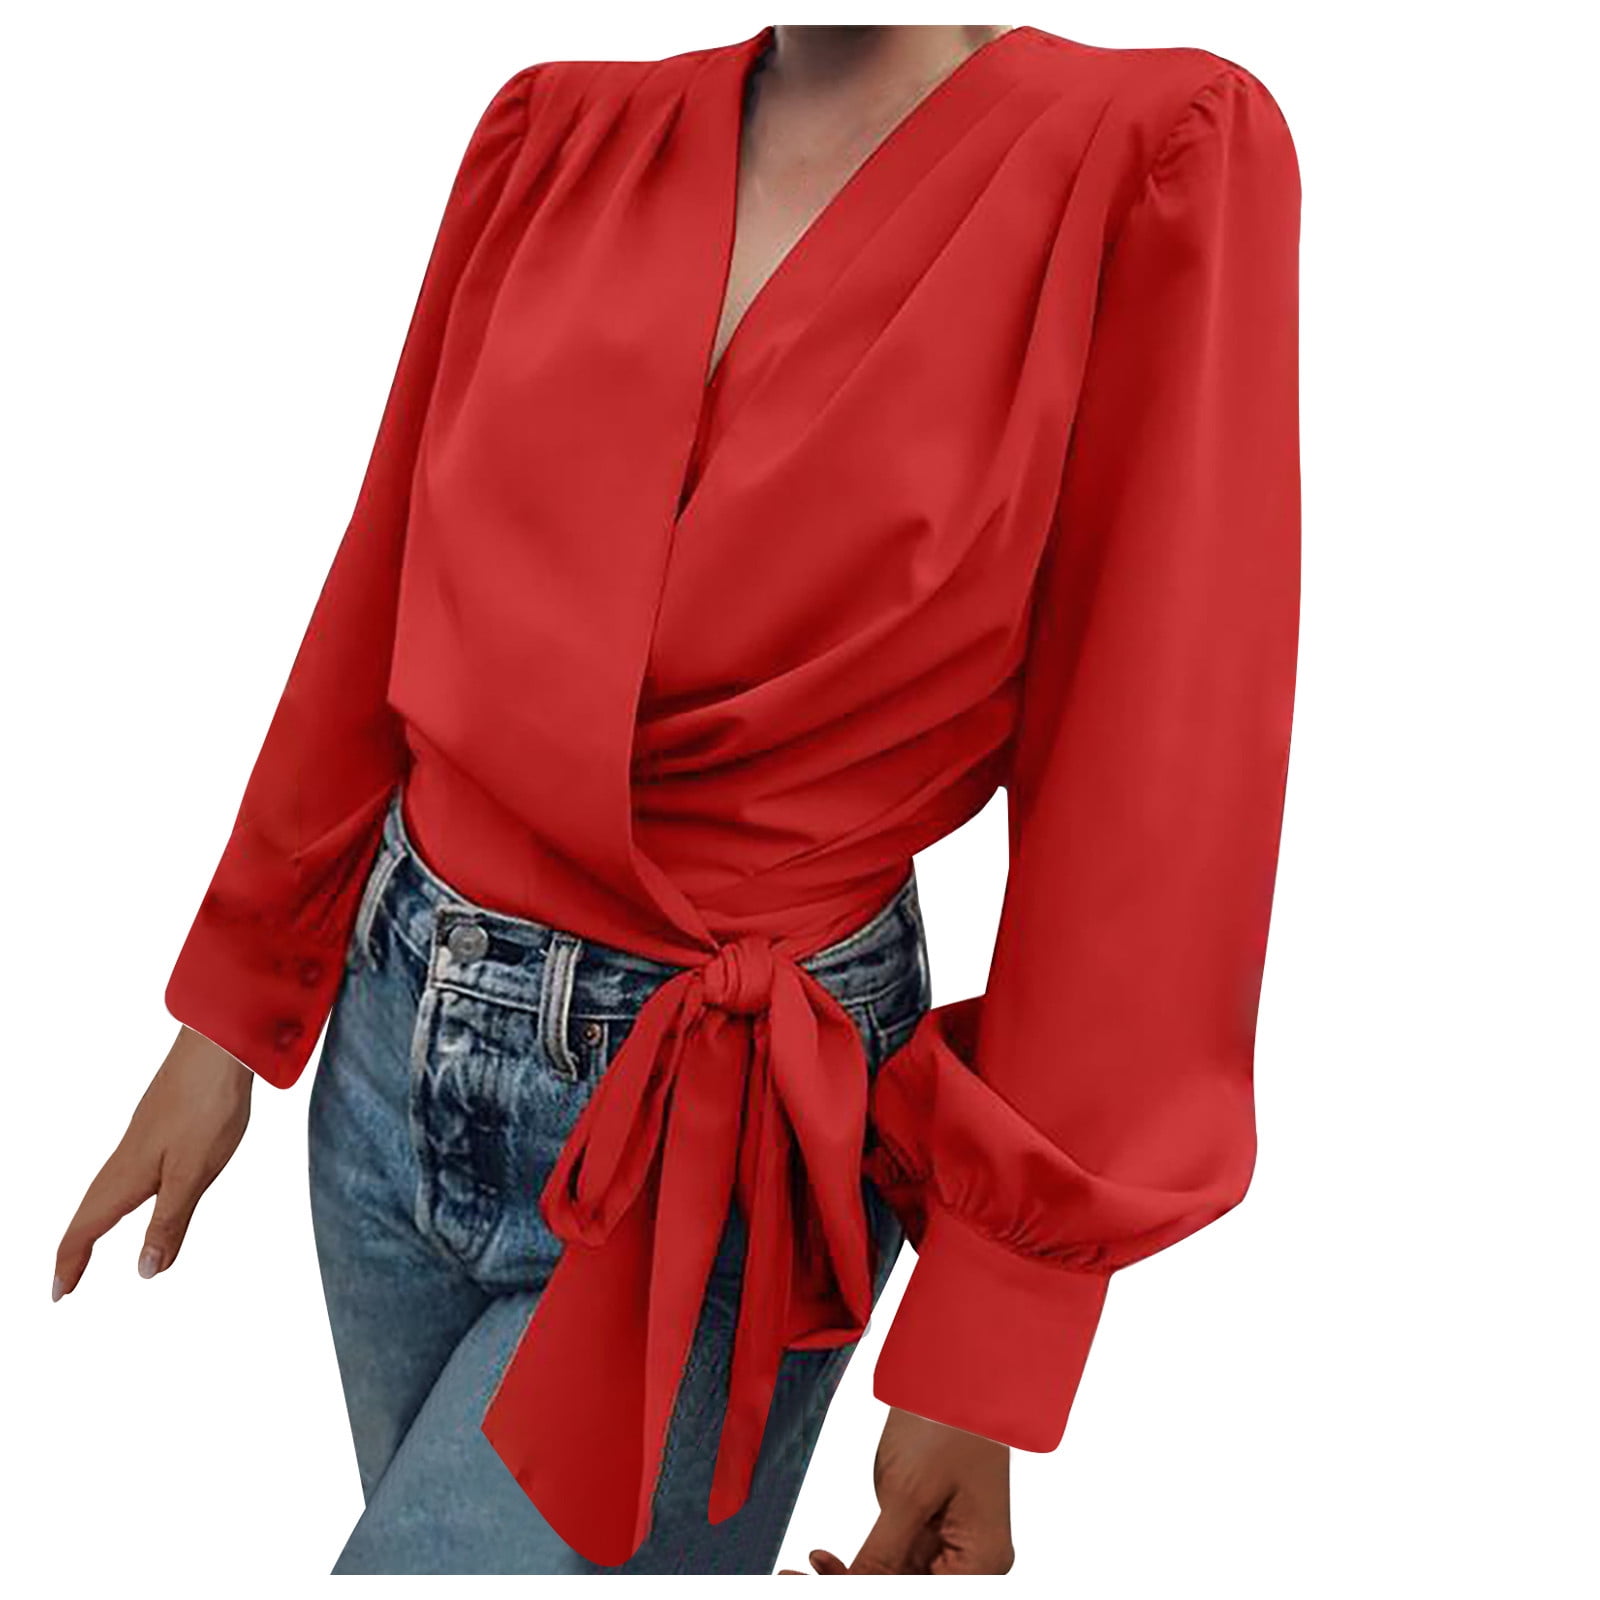 Form Fitting Long Sleeve Wrap Top with Self-Tie